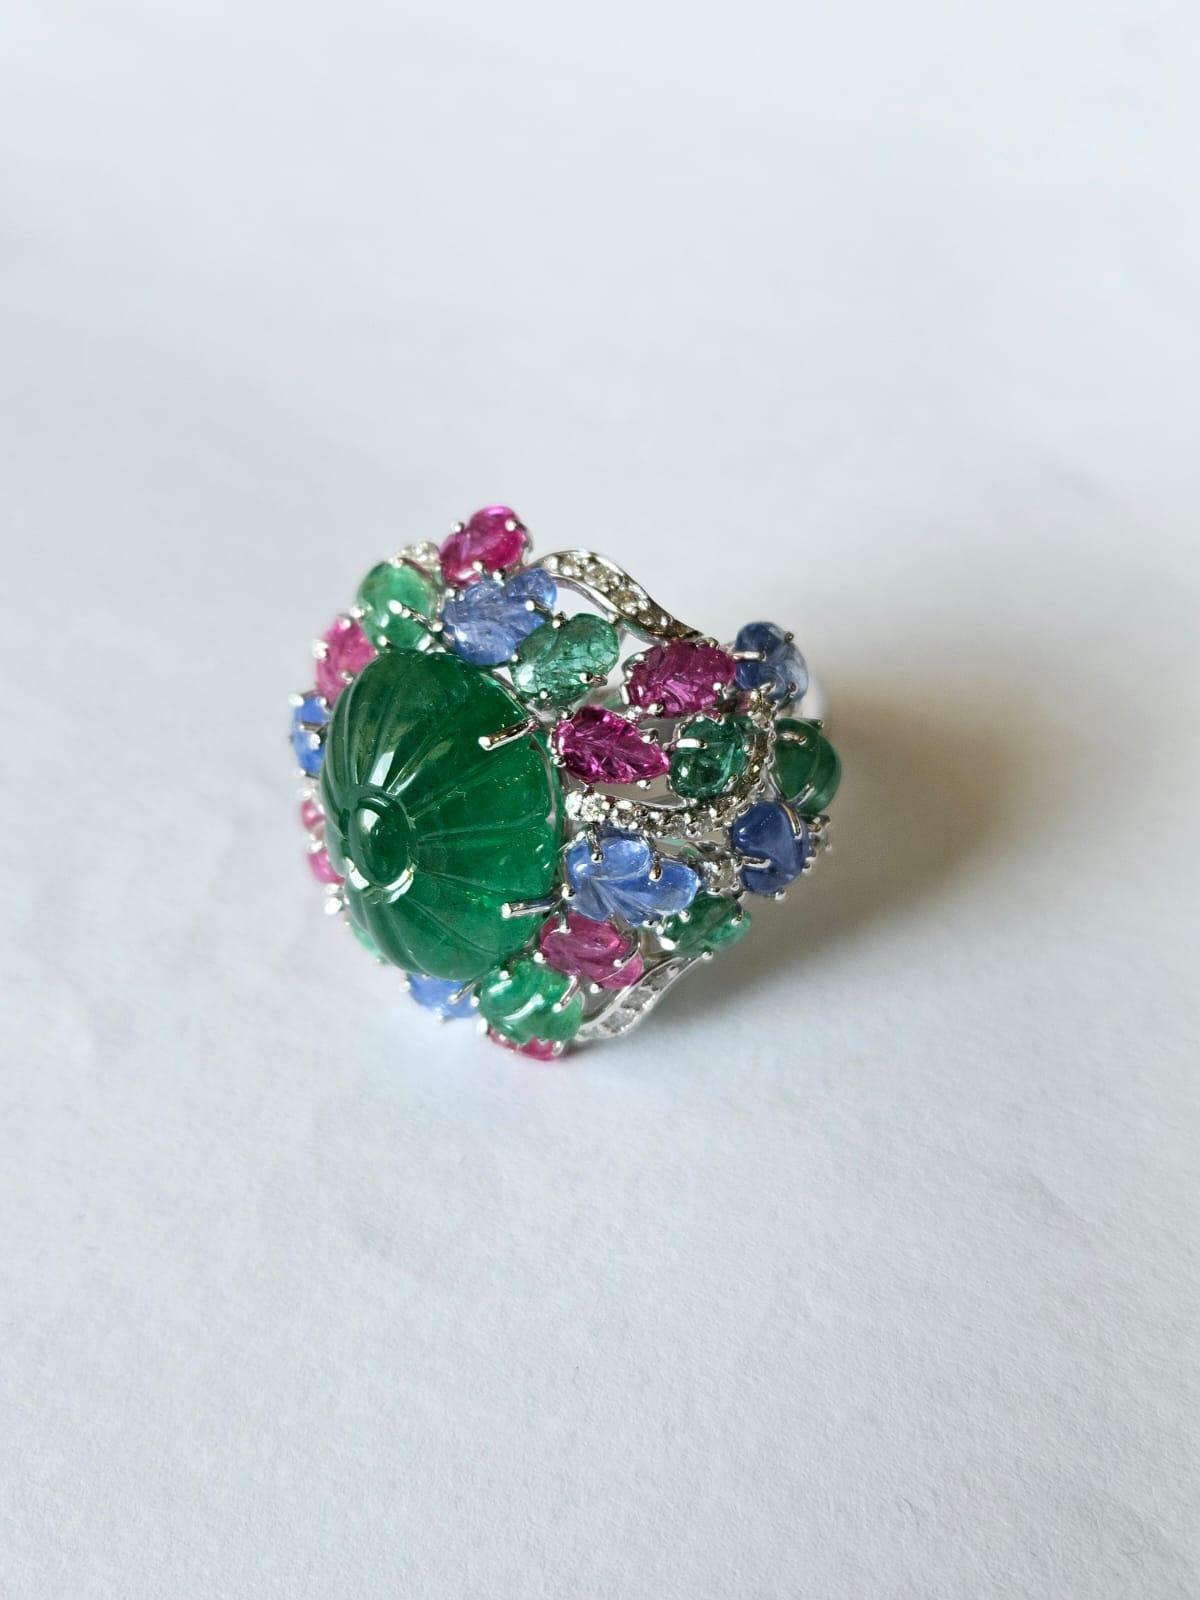 Round Cut Carved Emerald, Blue Sapphires, Rubies & Diamonds Tutti Frutti Cocktail Ring For Sale